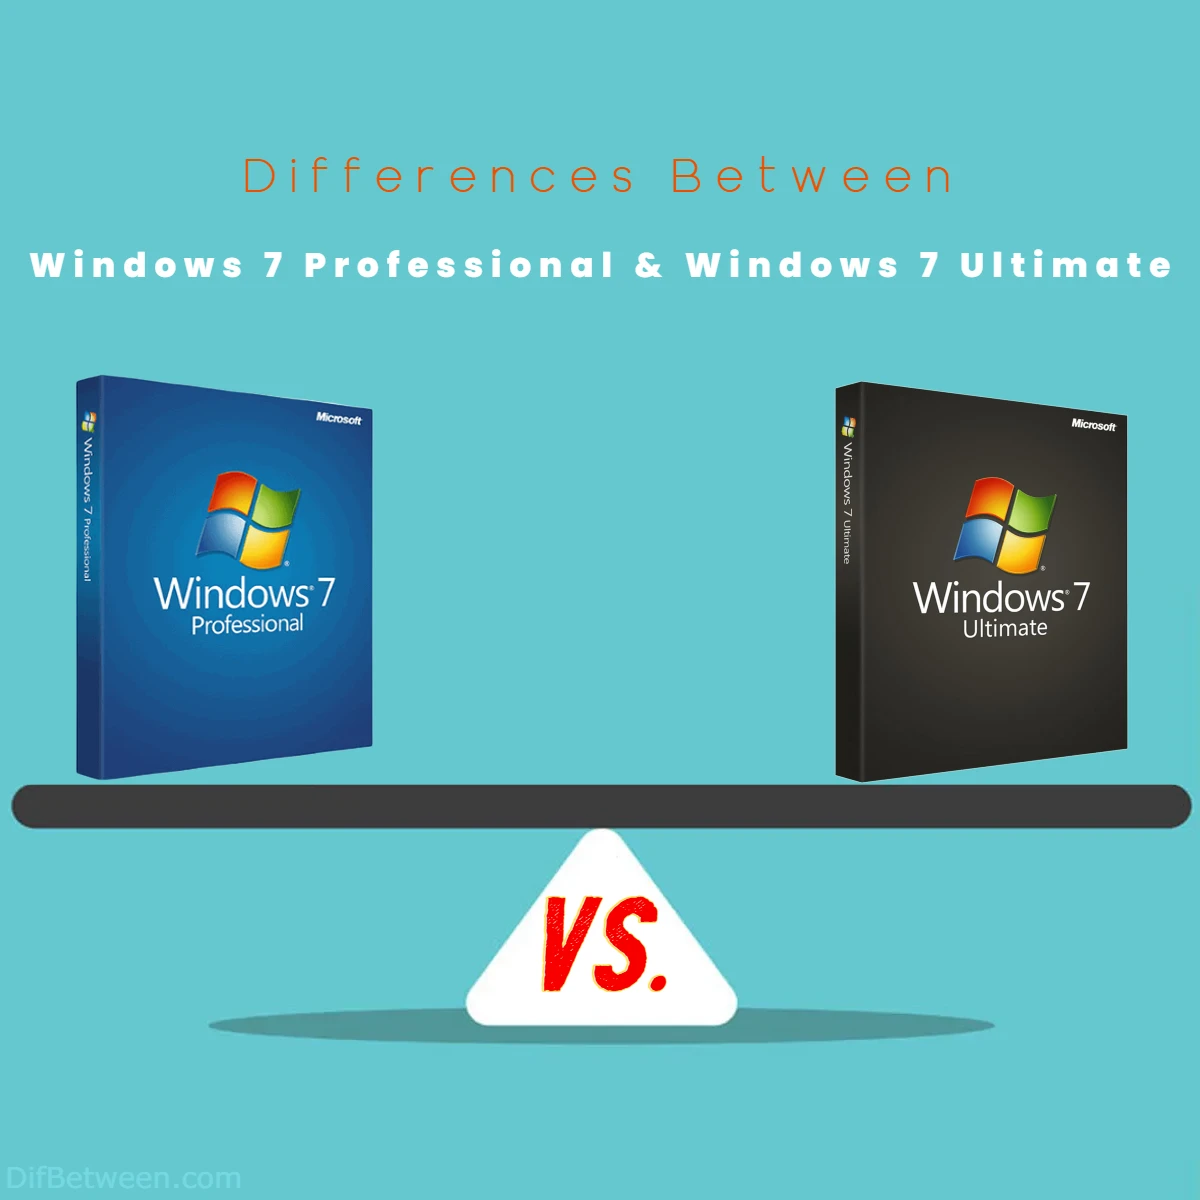 Differences Between Windows 7 Professional vs Windows 7 Ultimate